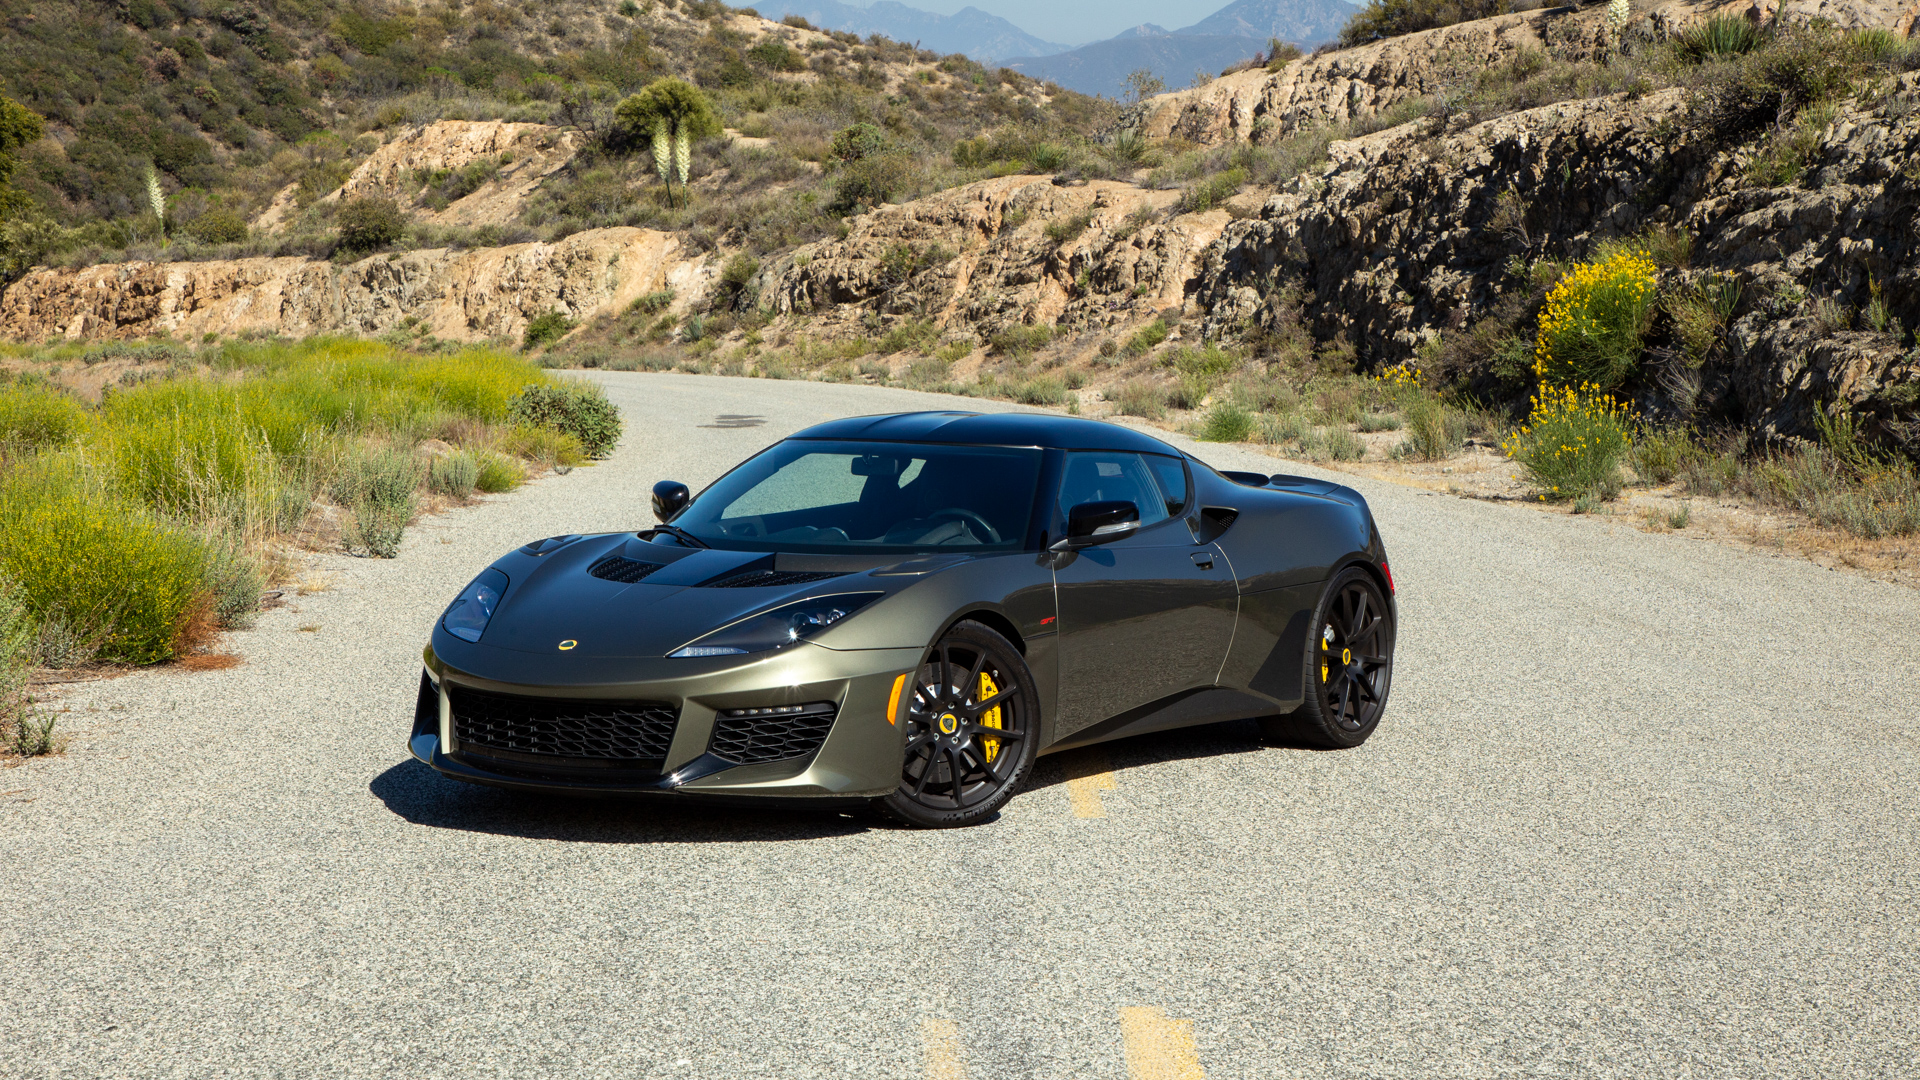 First drive review: 2021 Lotus Evora GT offers a refreshingly unfiltered  motoring experience